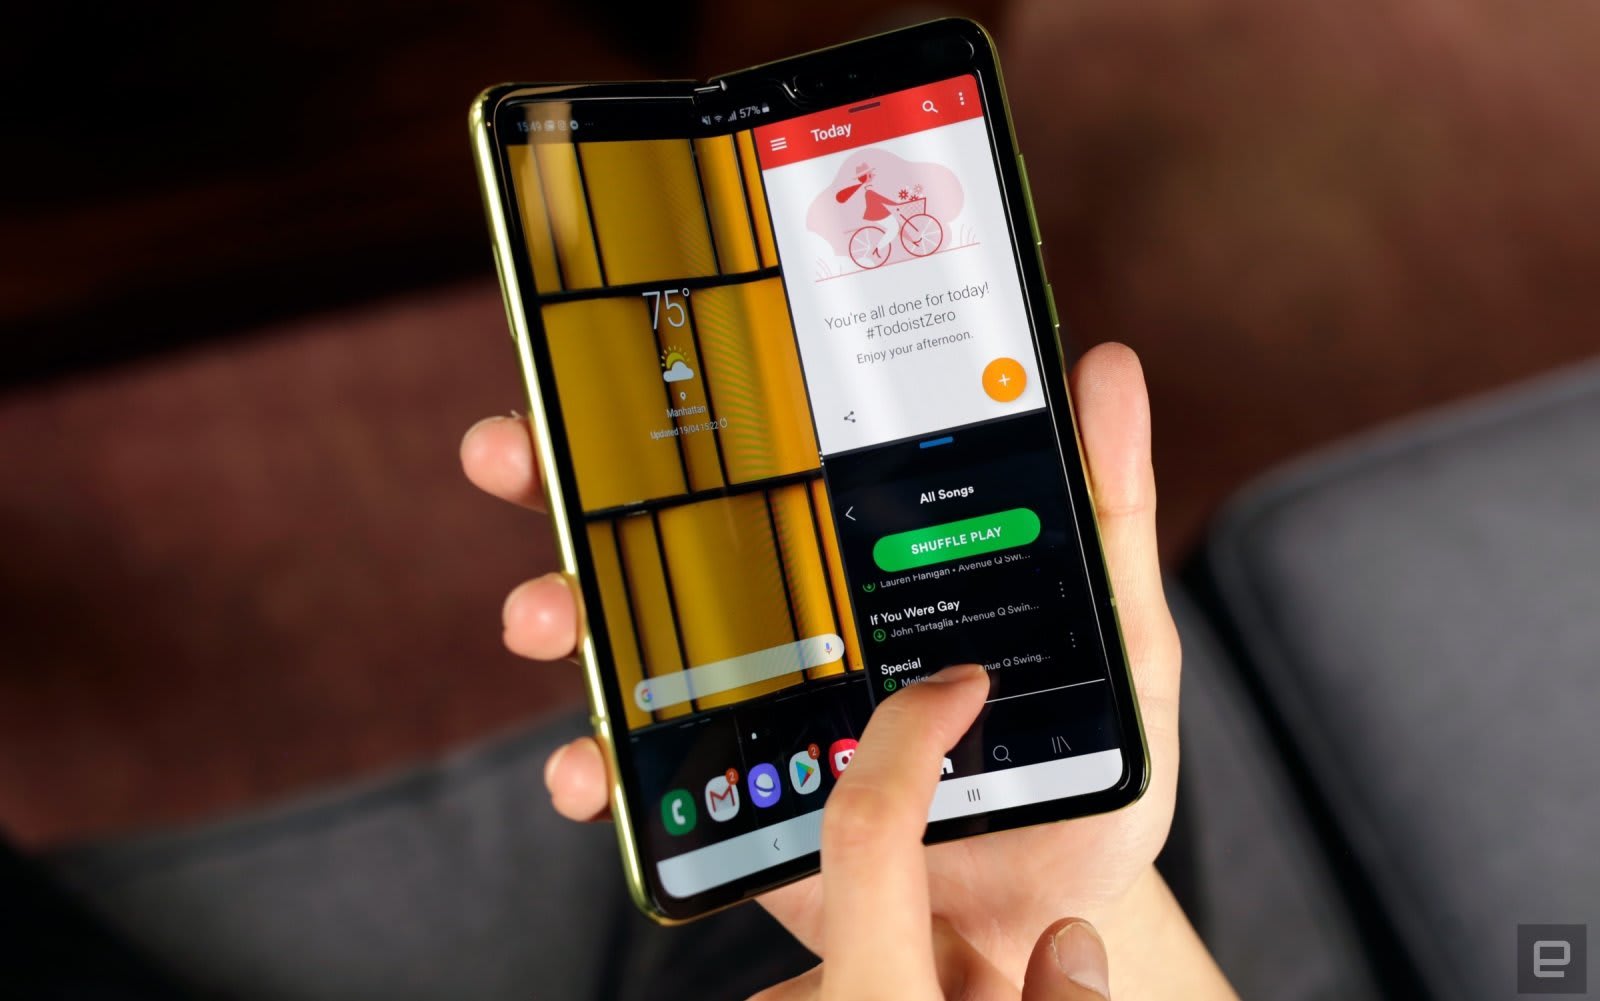 Image result for samsung galaxy fold